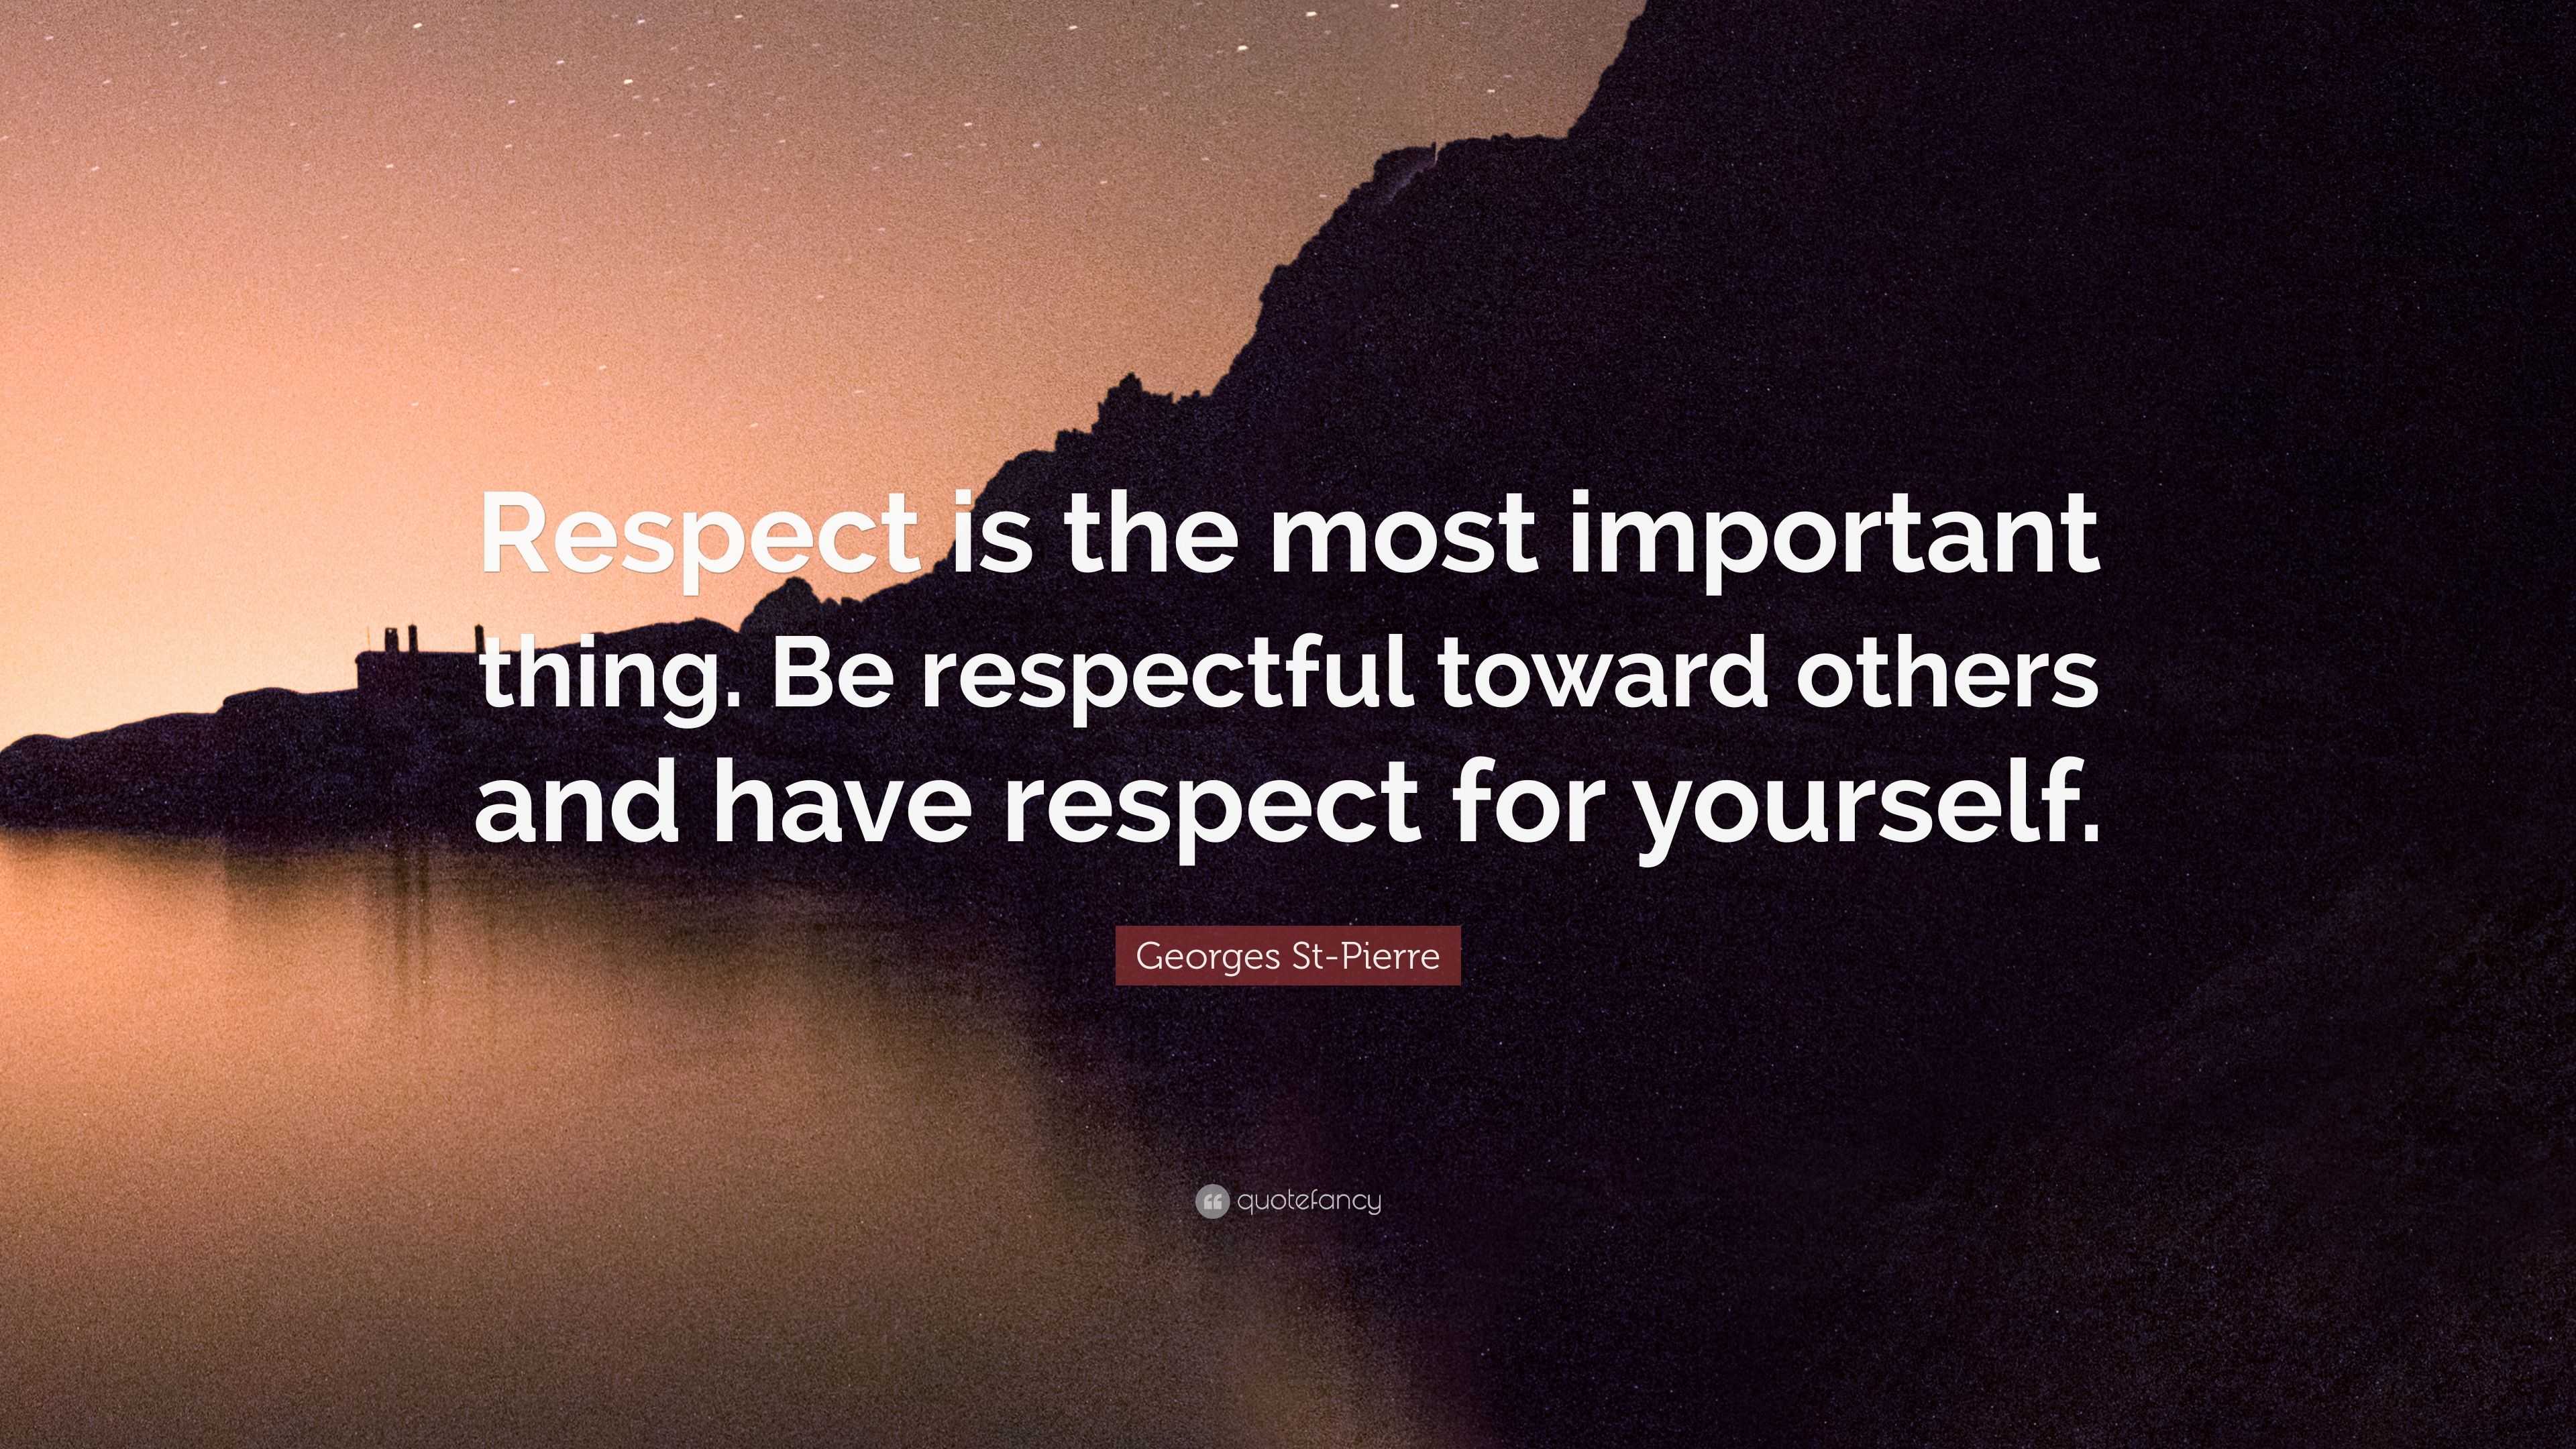 Georges St-Pierre Quote: “Respect is the most important thing. Be